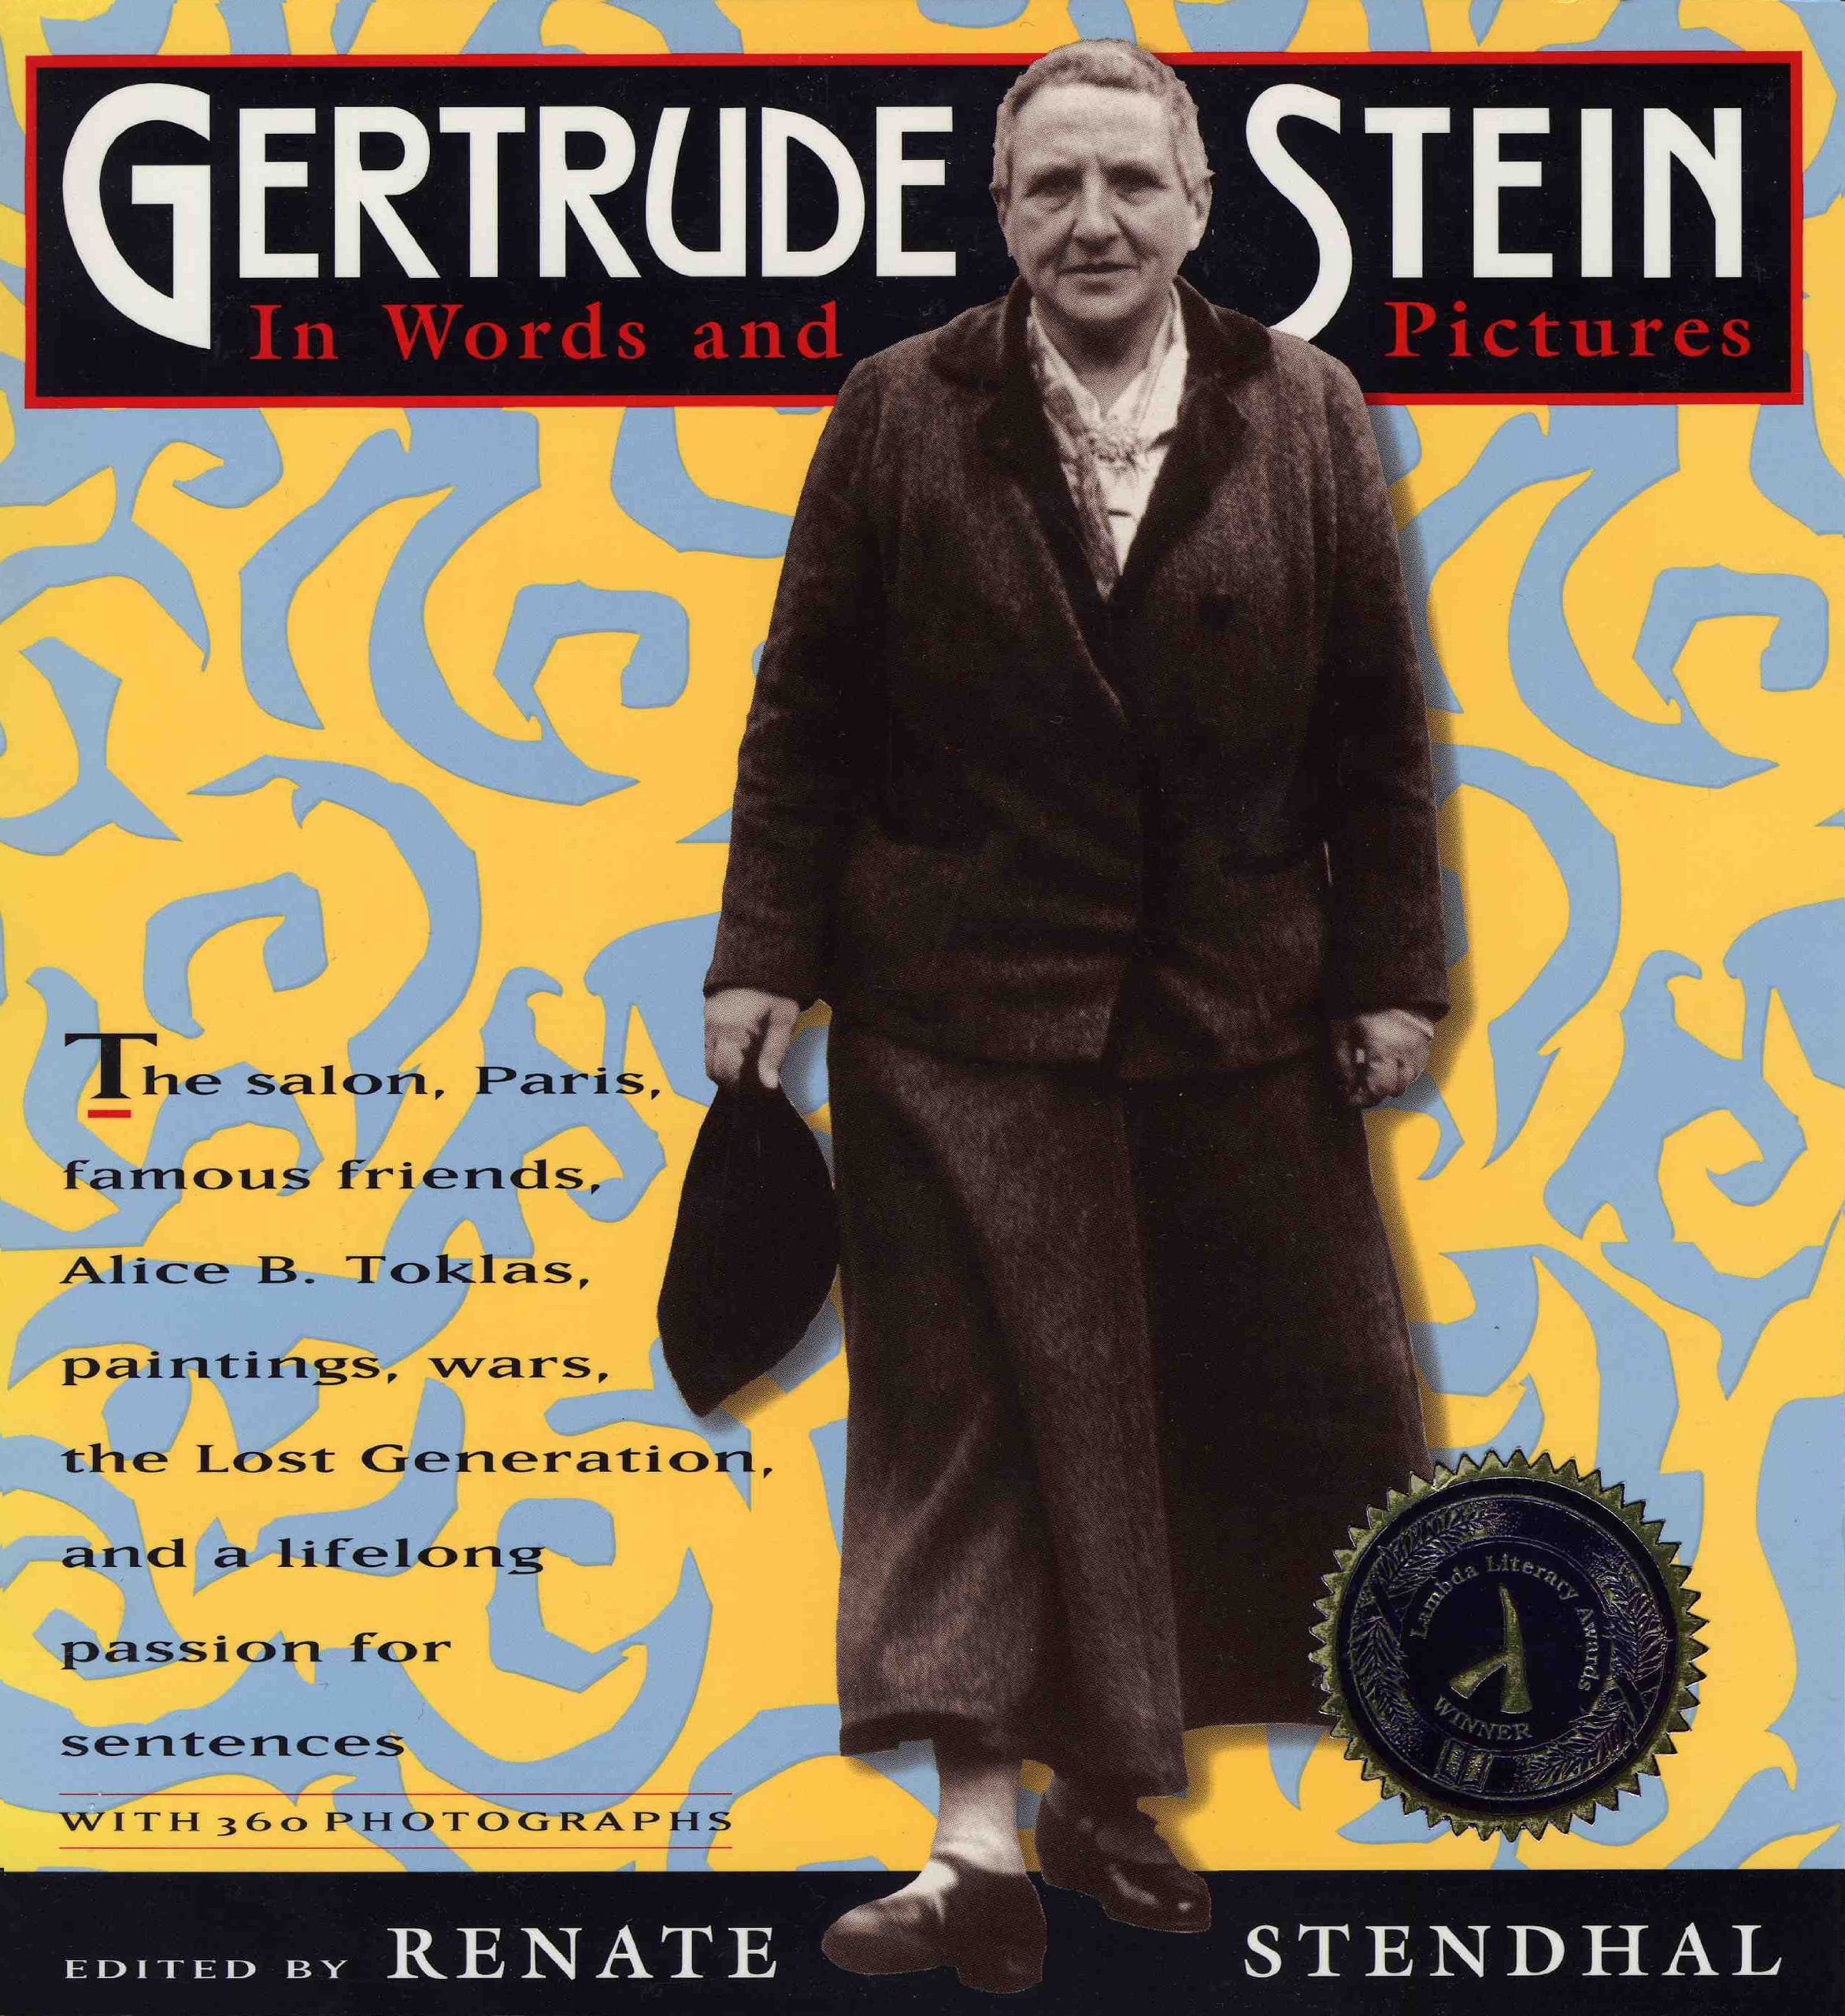 Gertrude Stein: In Words and Pictures